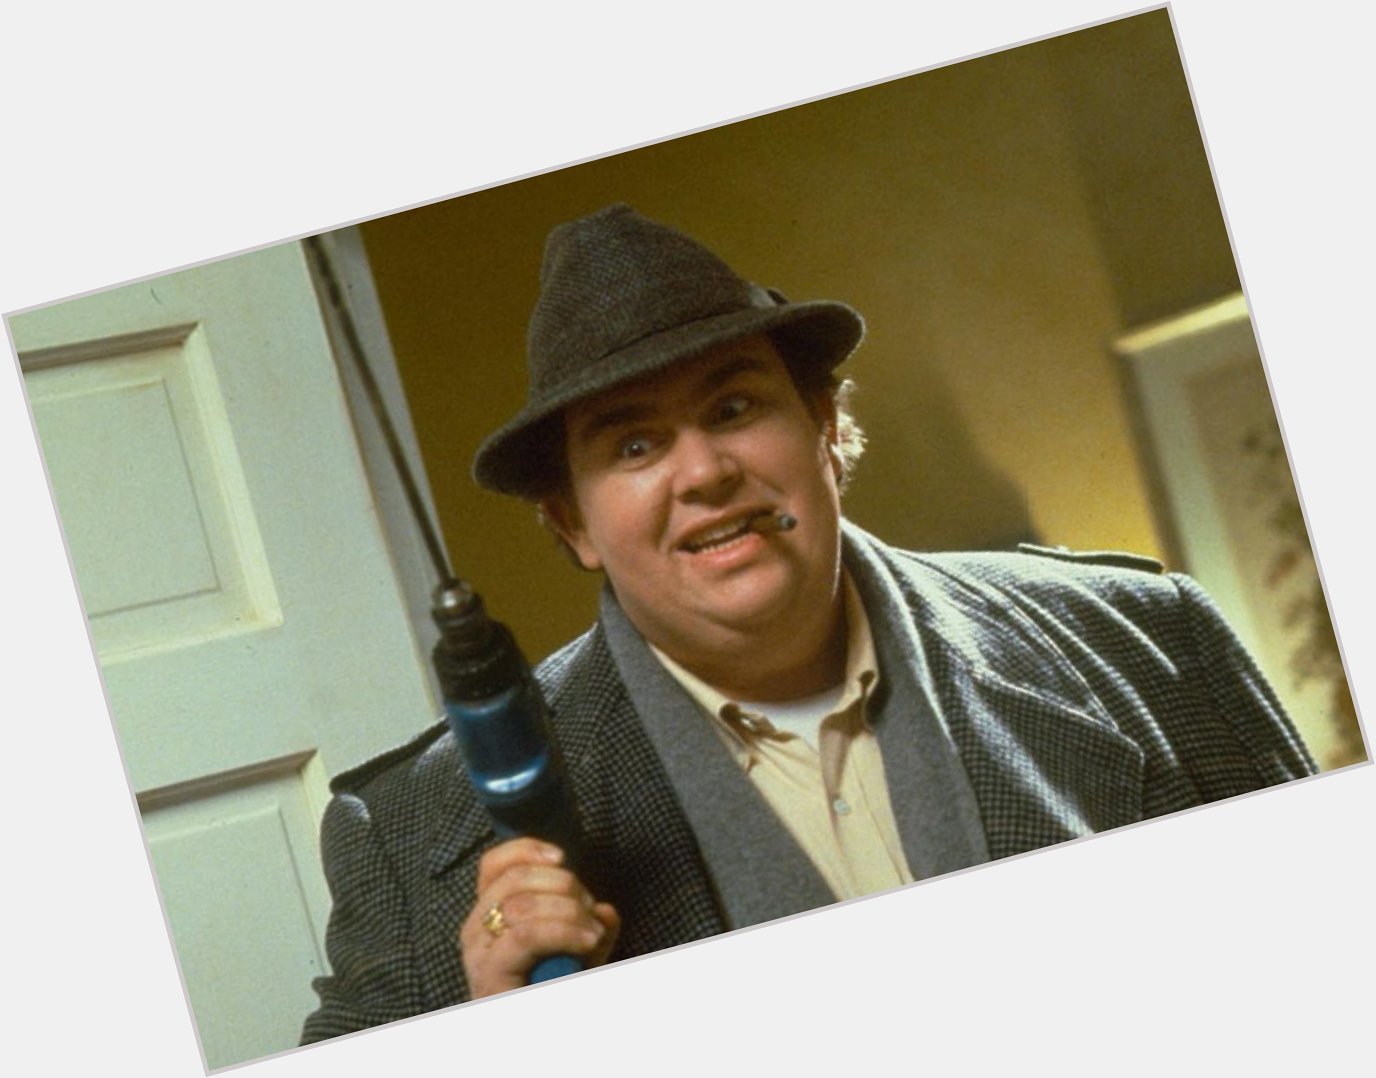 Happy Birthday to the late John Candy from all of us at DoYouRemember!
Name this film! 